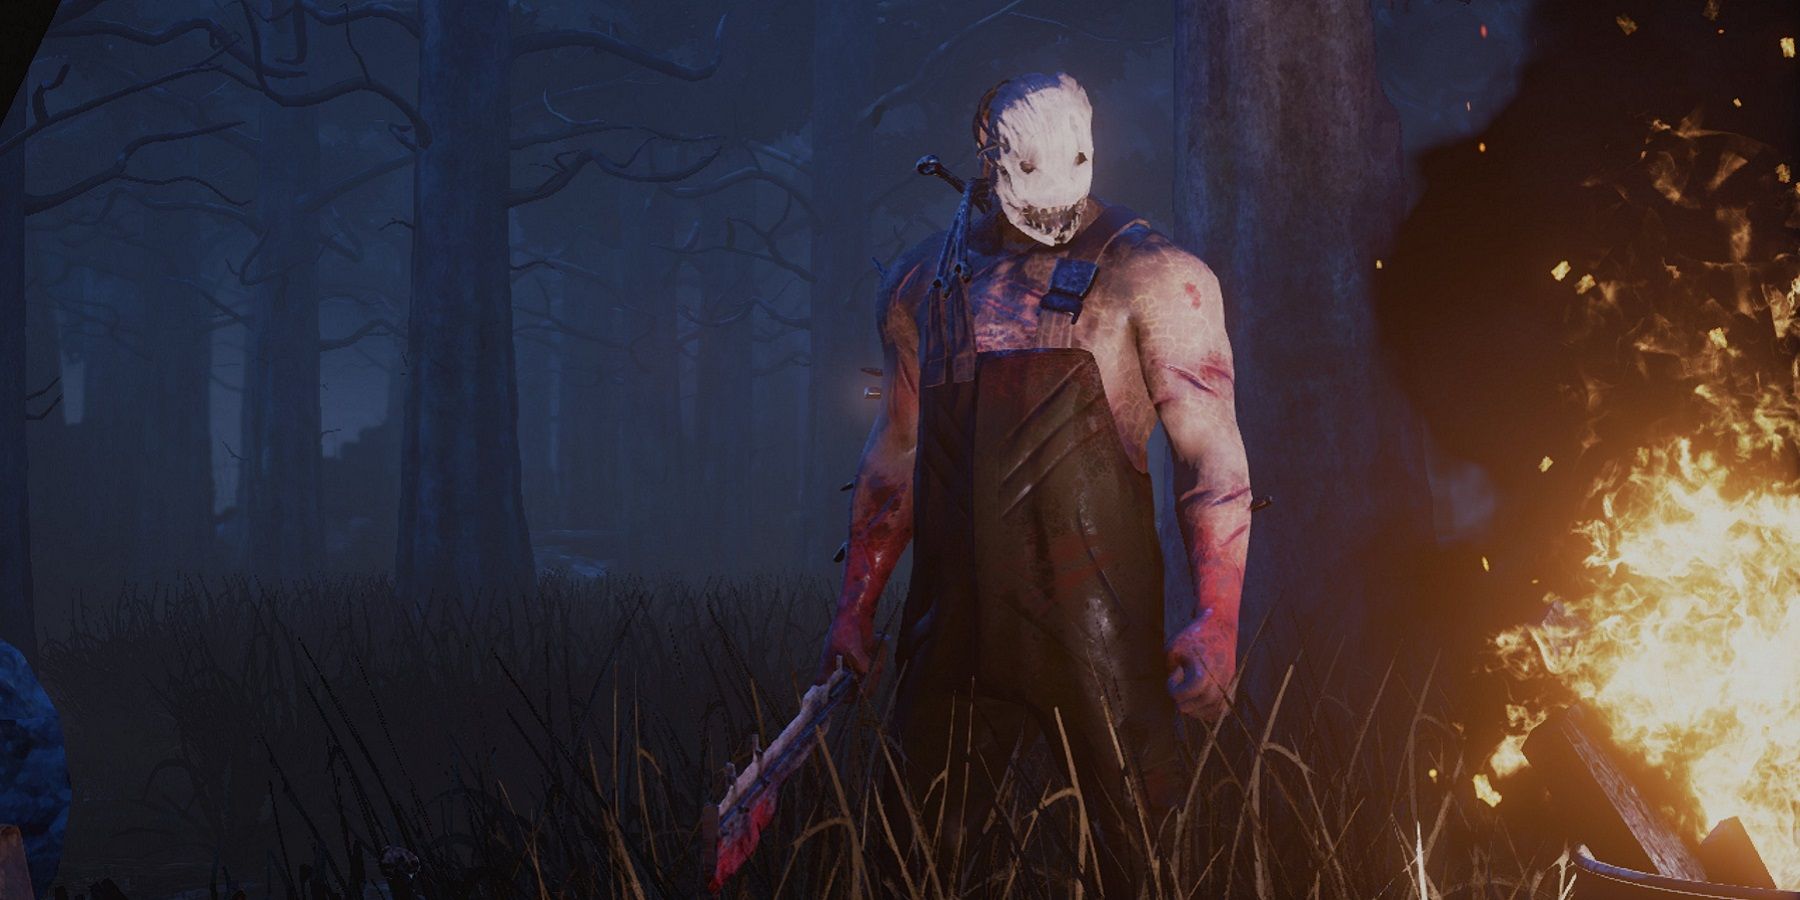 Image from Dead by Daylight showing the Trapper stood next to a bonfire.